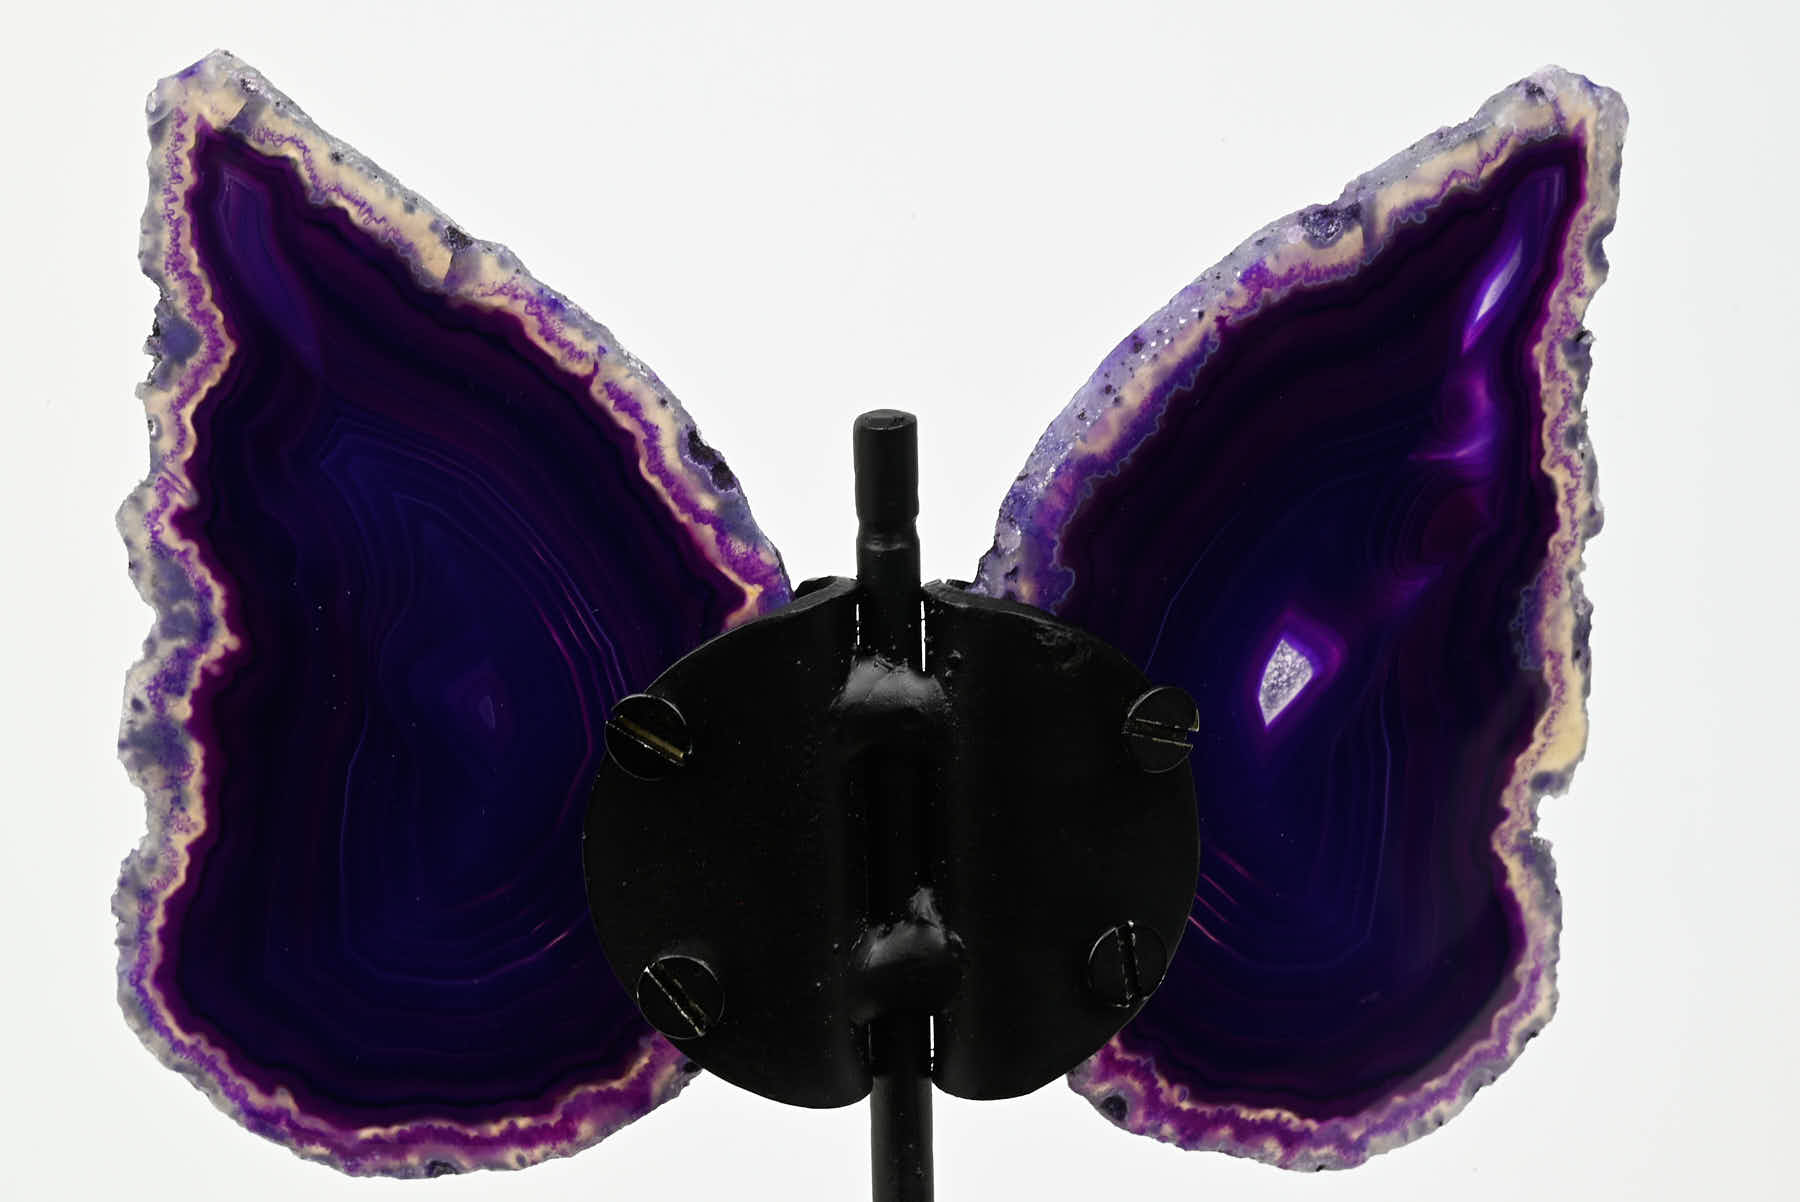 Purple Agate Butterfly on Stand - 0.4kg and 19cm Tall - #BUPURP-10012